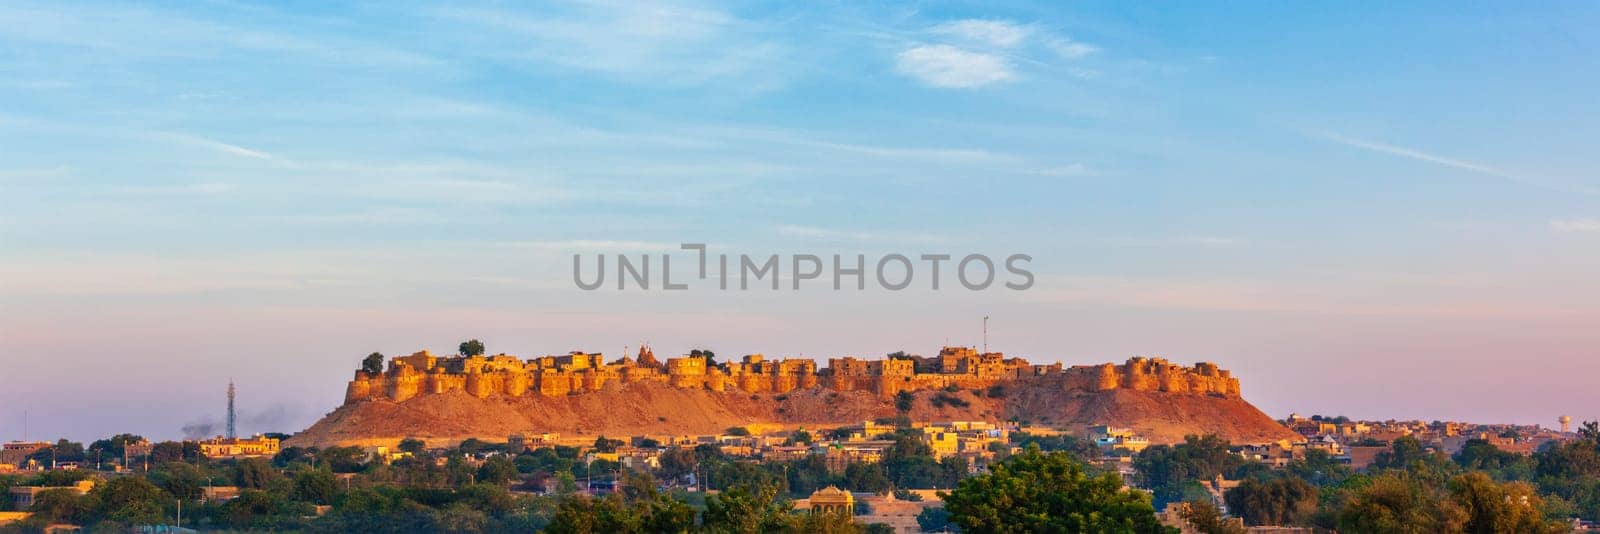 Panorama of Jaisalmer Fort known as the Golden Fort Sonar quila, by dimol